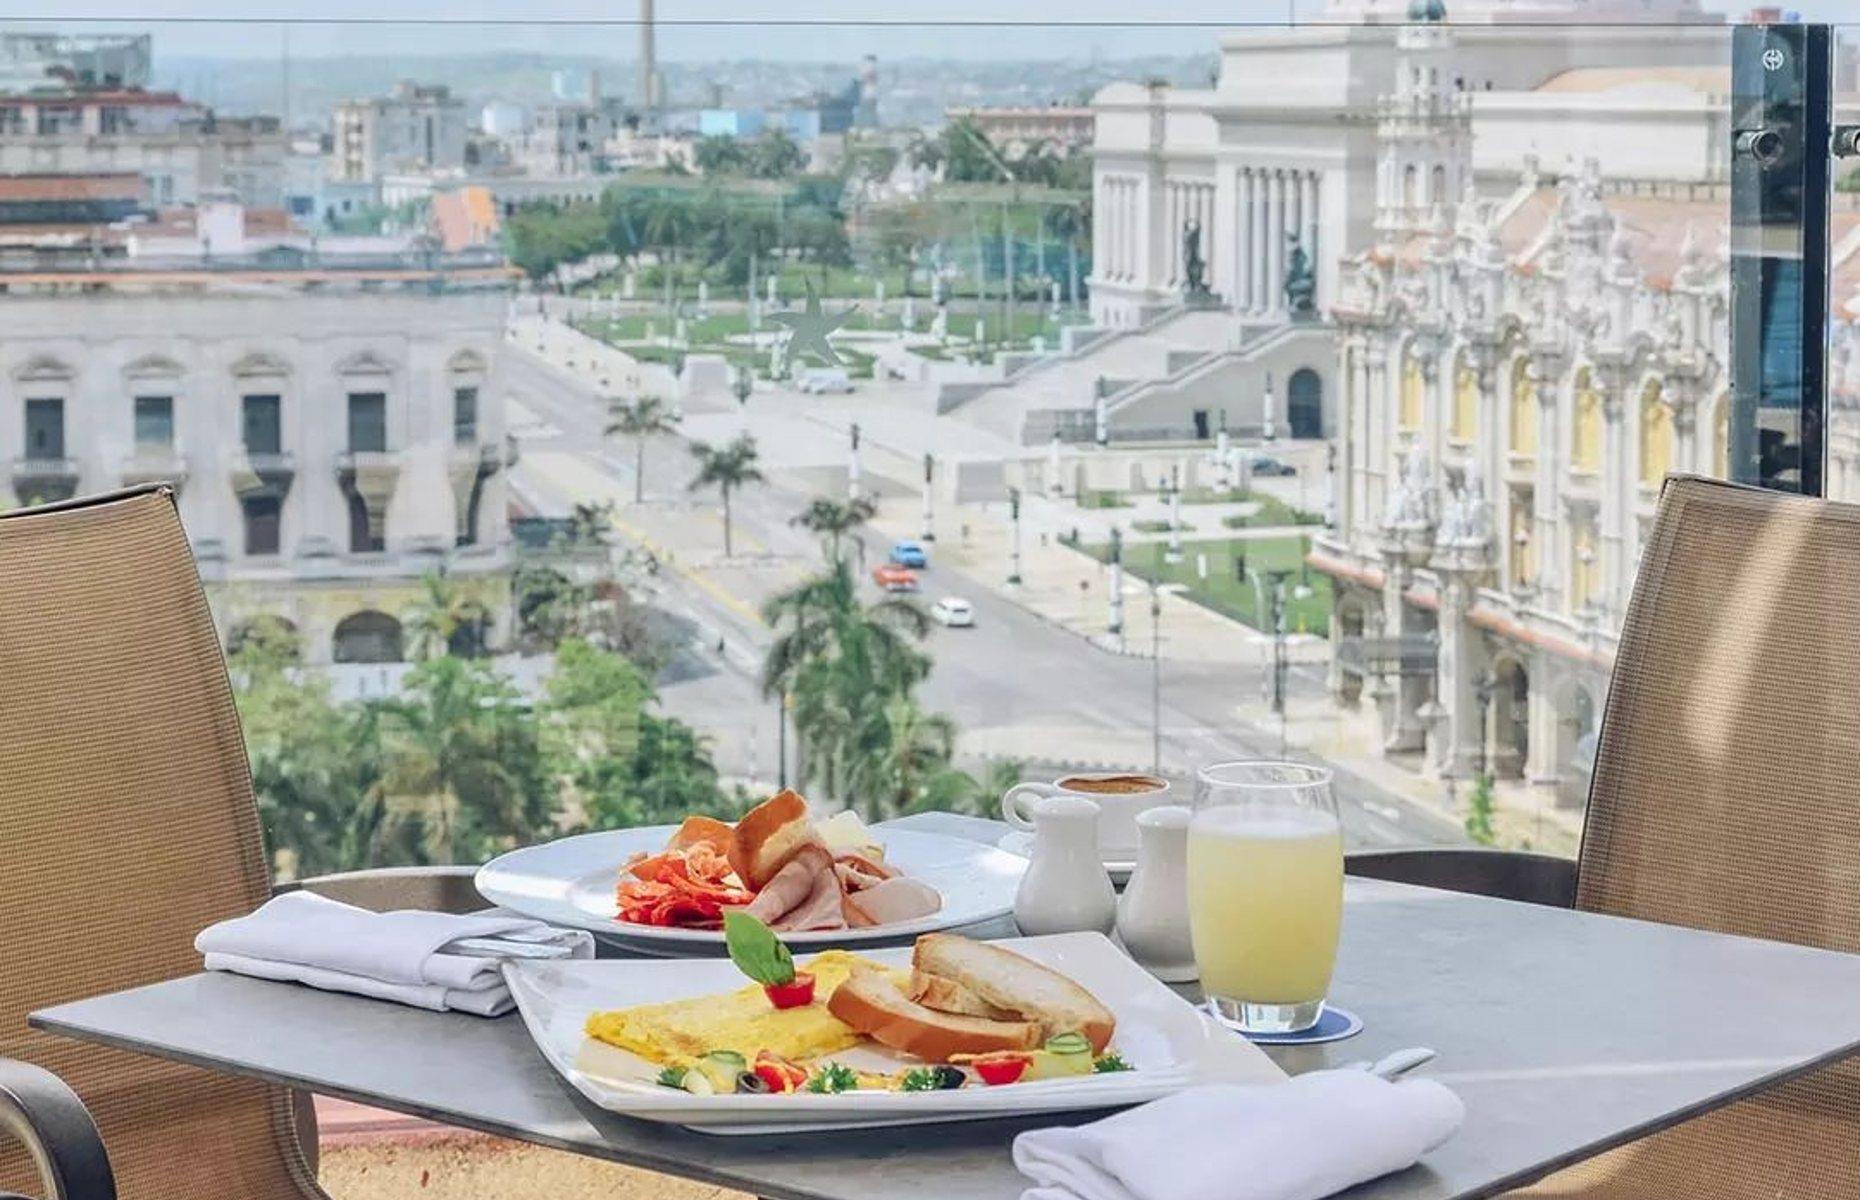 <p>The <a href="https://www.iberostar.com/en/hotels/la-habana/iberostar-parque-central/">Iberostar Parque Central</a> is set across a pair of historic buildings with rooftop pools and wonderful views across Havana. Running with the theme of two, there is also a duo of restaurants within the hotel where breakfast is served daily. In Restaurant Habana Elegante, you’ll find a buffet breakfast offering both international and Cuban fare. Over at the Mediterranean Restaurant, inspiration is taken from the local cuisine and given a continental European twist. Book on a bed and breakfast or half-board basis to ensure you don’t miss out.</p>